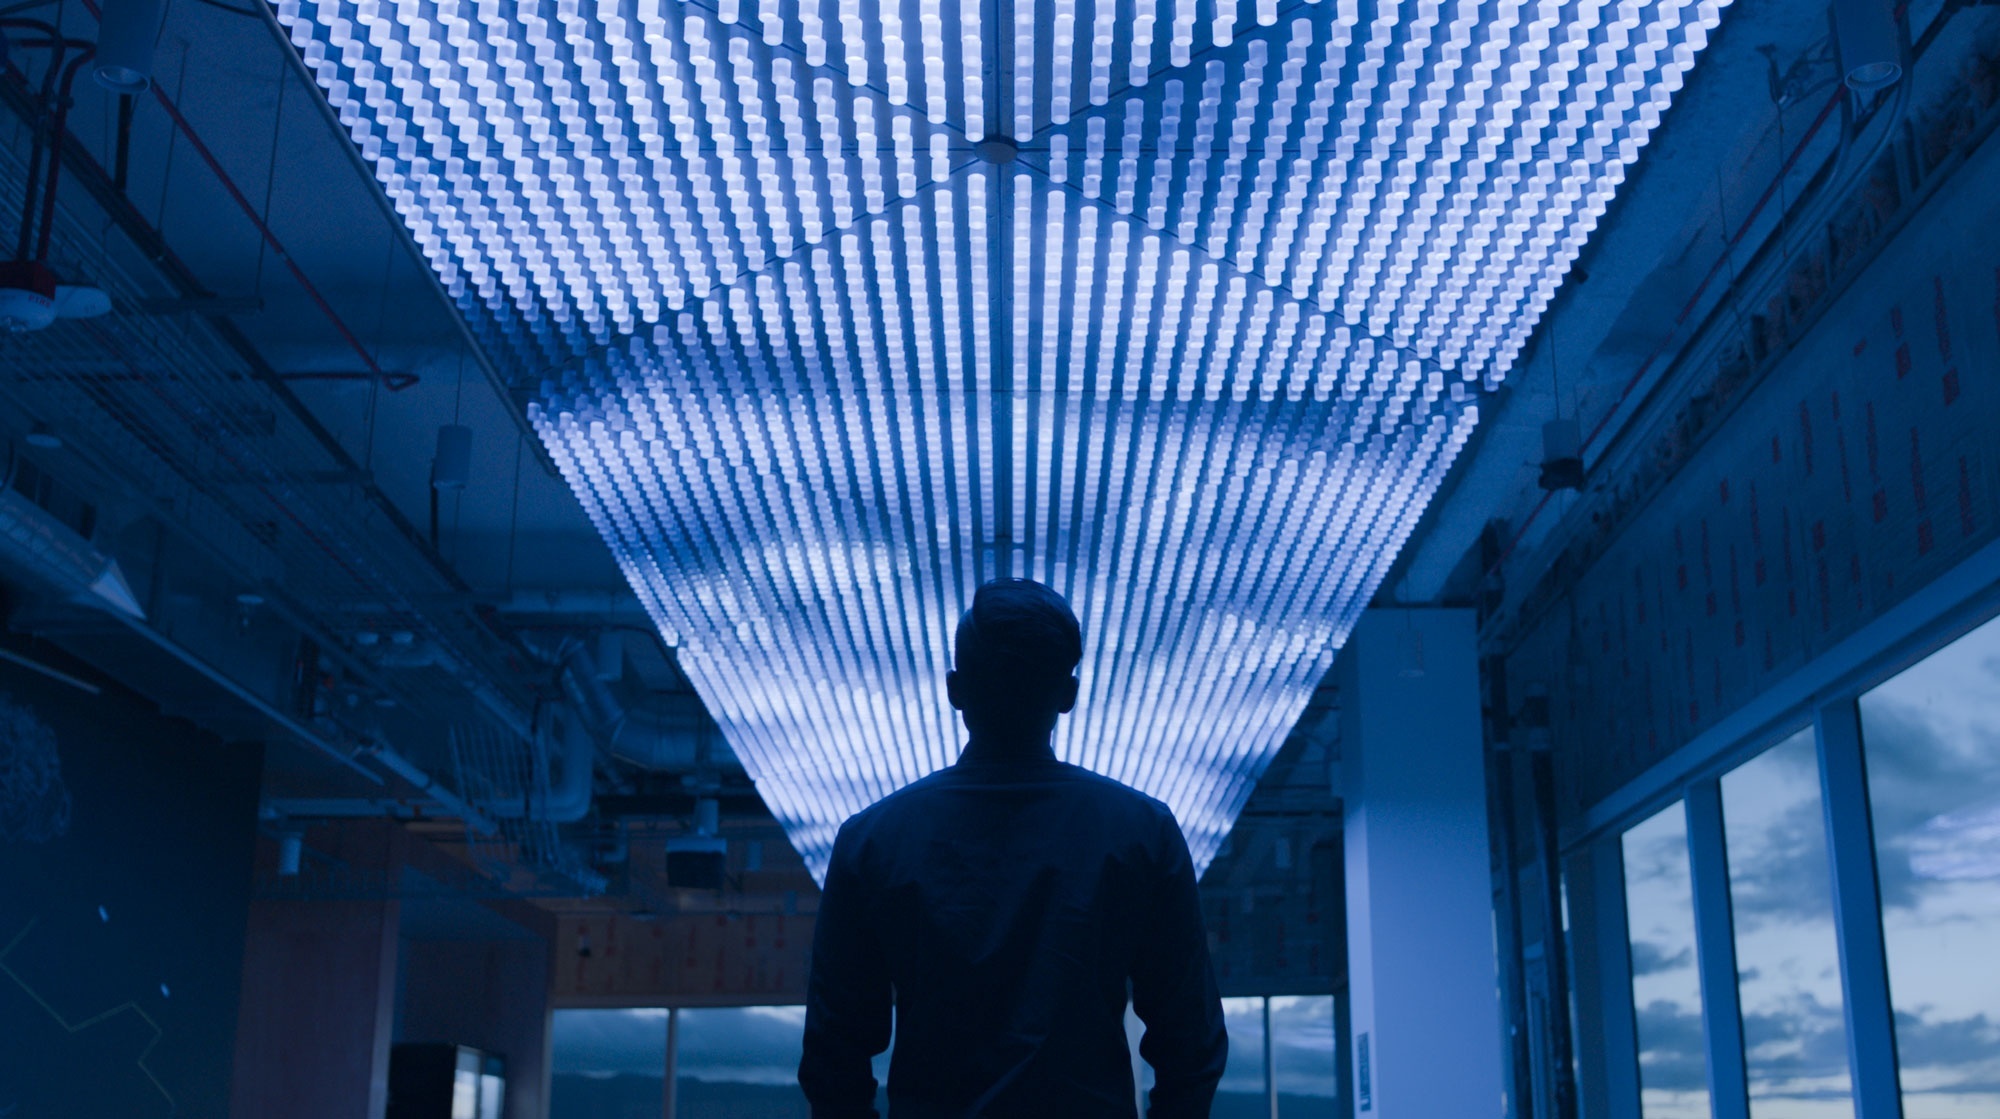 Symmetrical image of silhouetted man looking up at ceiling installation made of repeating protruding light modules that simulate waves and create visualisation